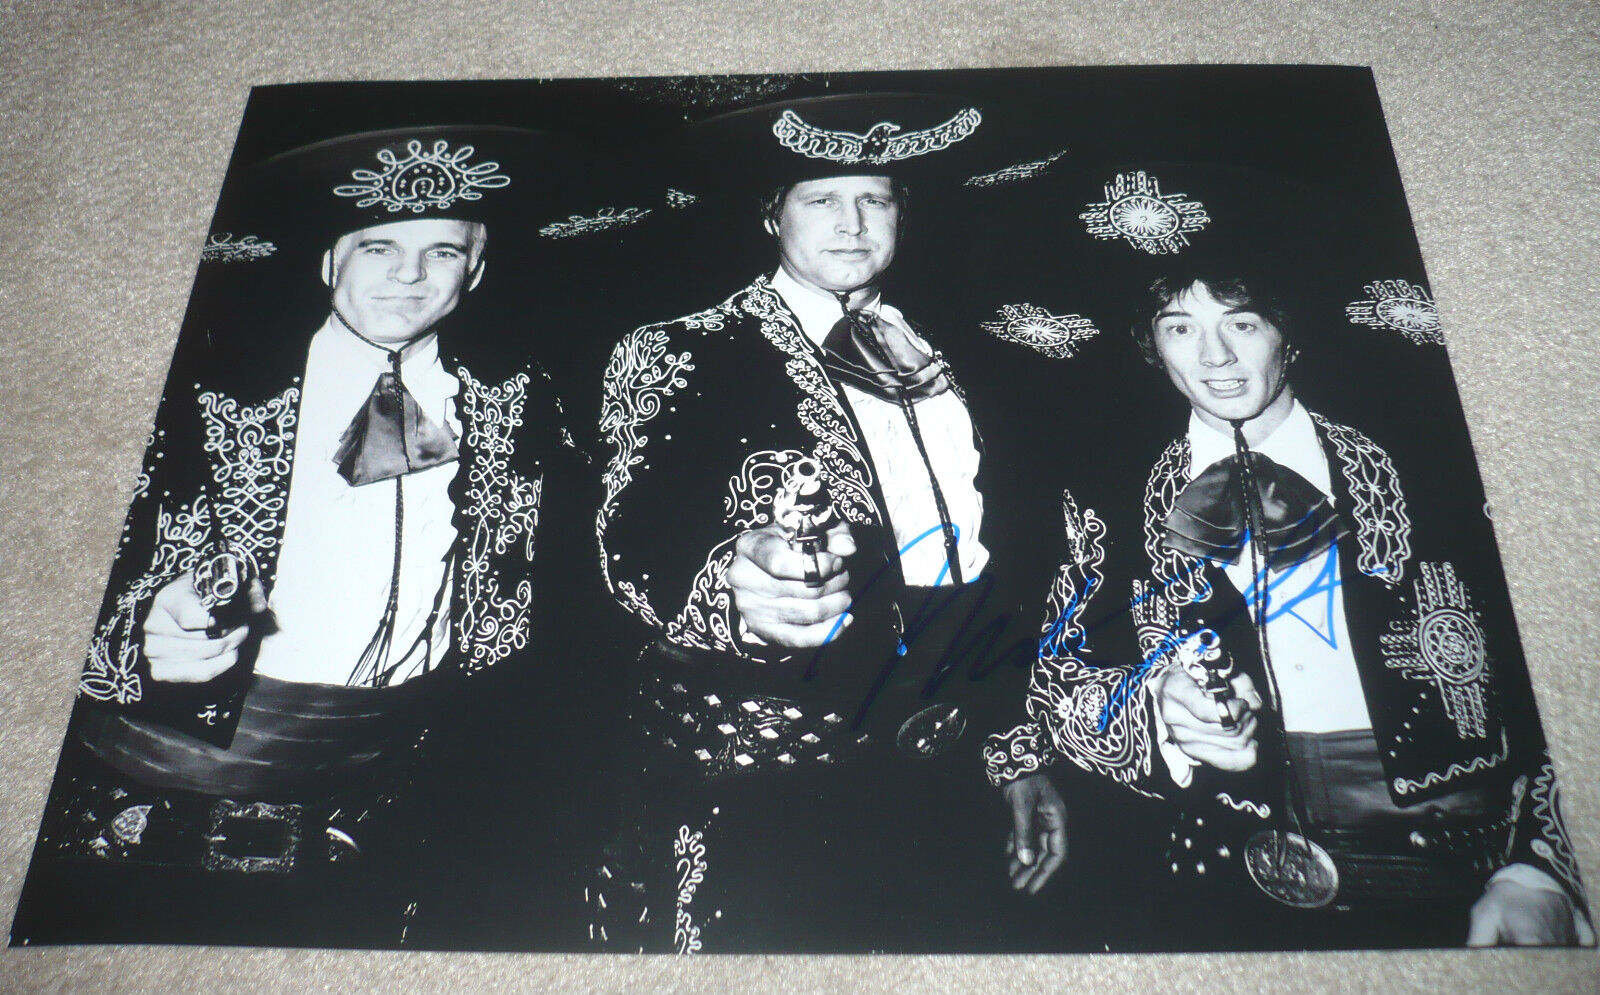 ACTOR COMEDIAN MARTIN SHORT SIGNED THREE AMIGOS 11X14 Photo Poster painting W/COA CHEVY CHASE